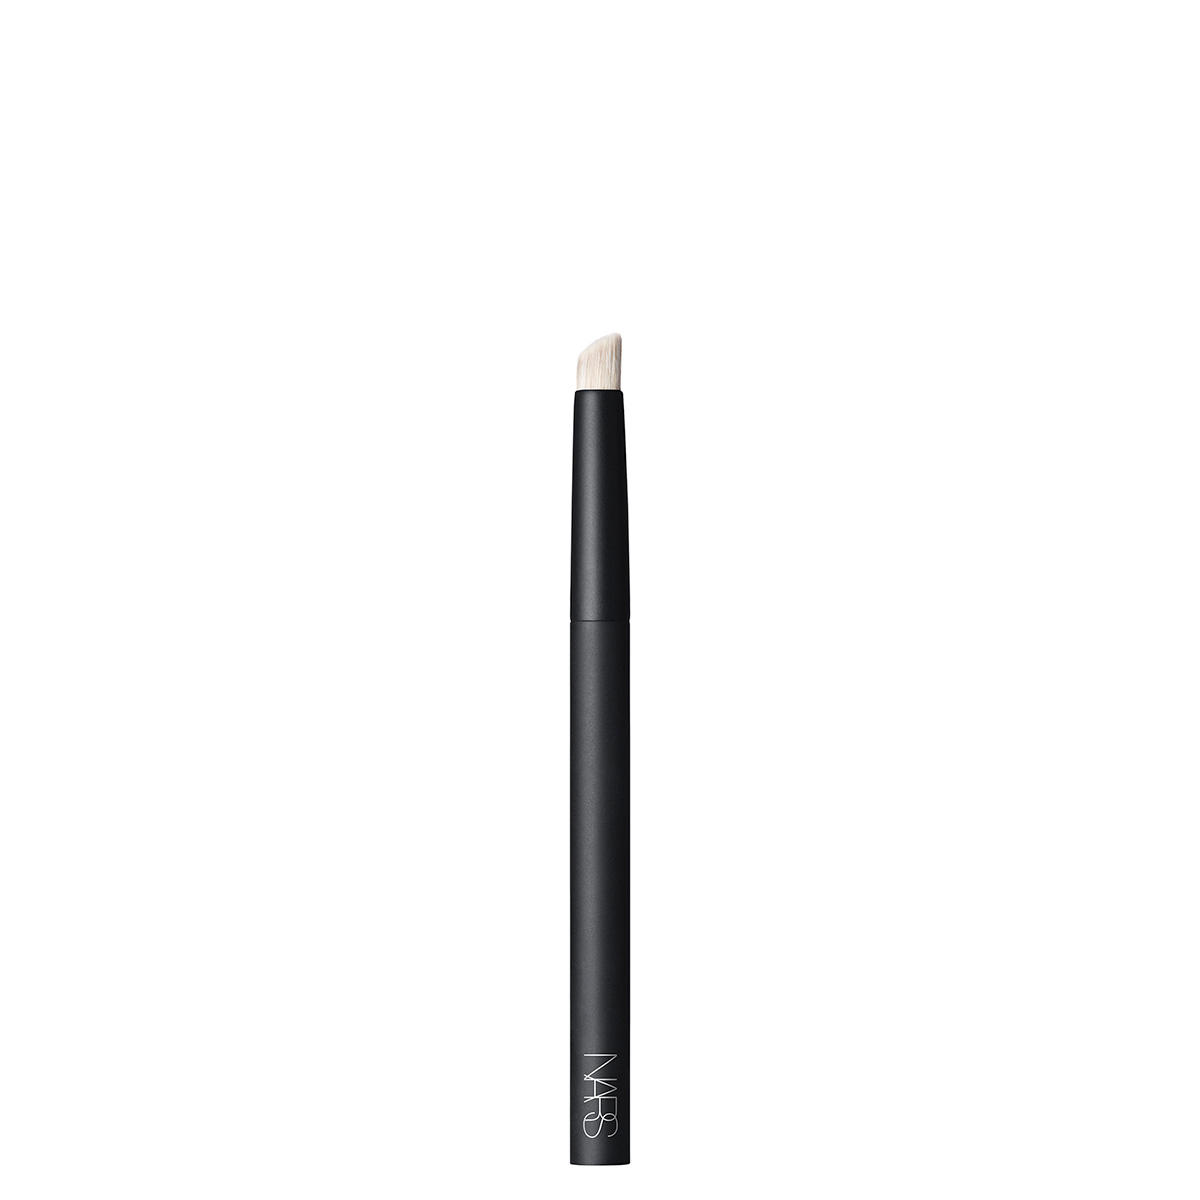 NARS The Small Sculptor Brush #8